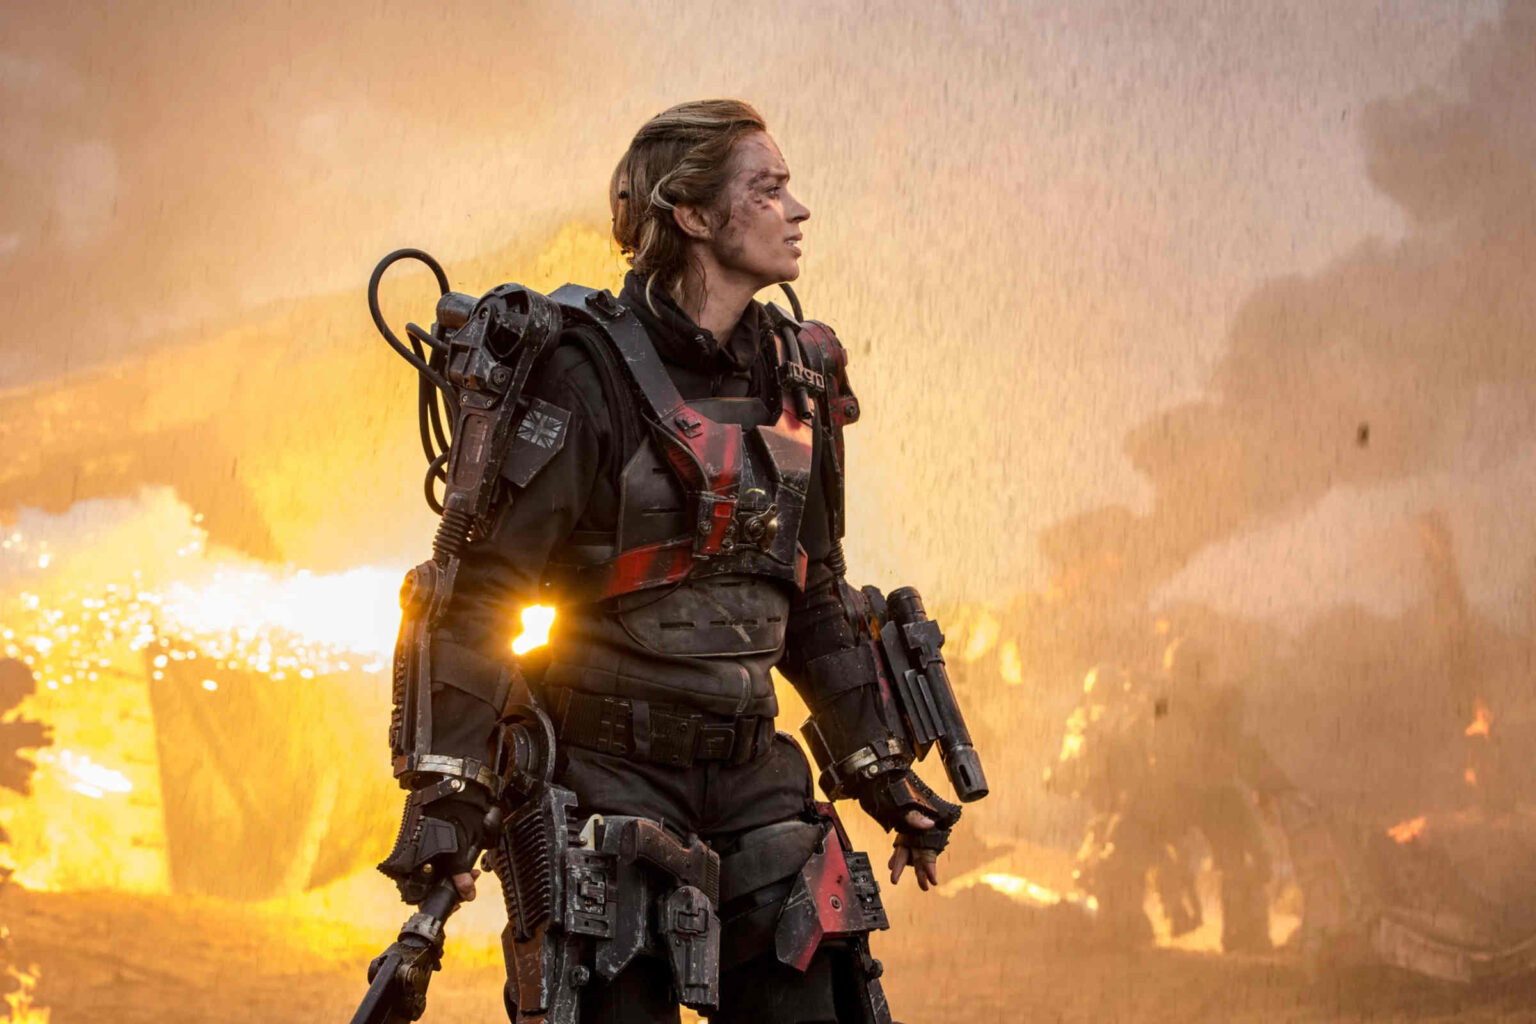 Fans of 'Edge of Tomorrow' are into the wacky and weird side of cinema. Here's why you will love these films that are just as chaotic!